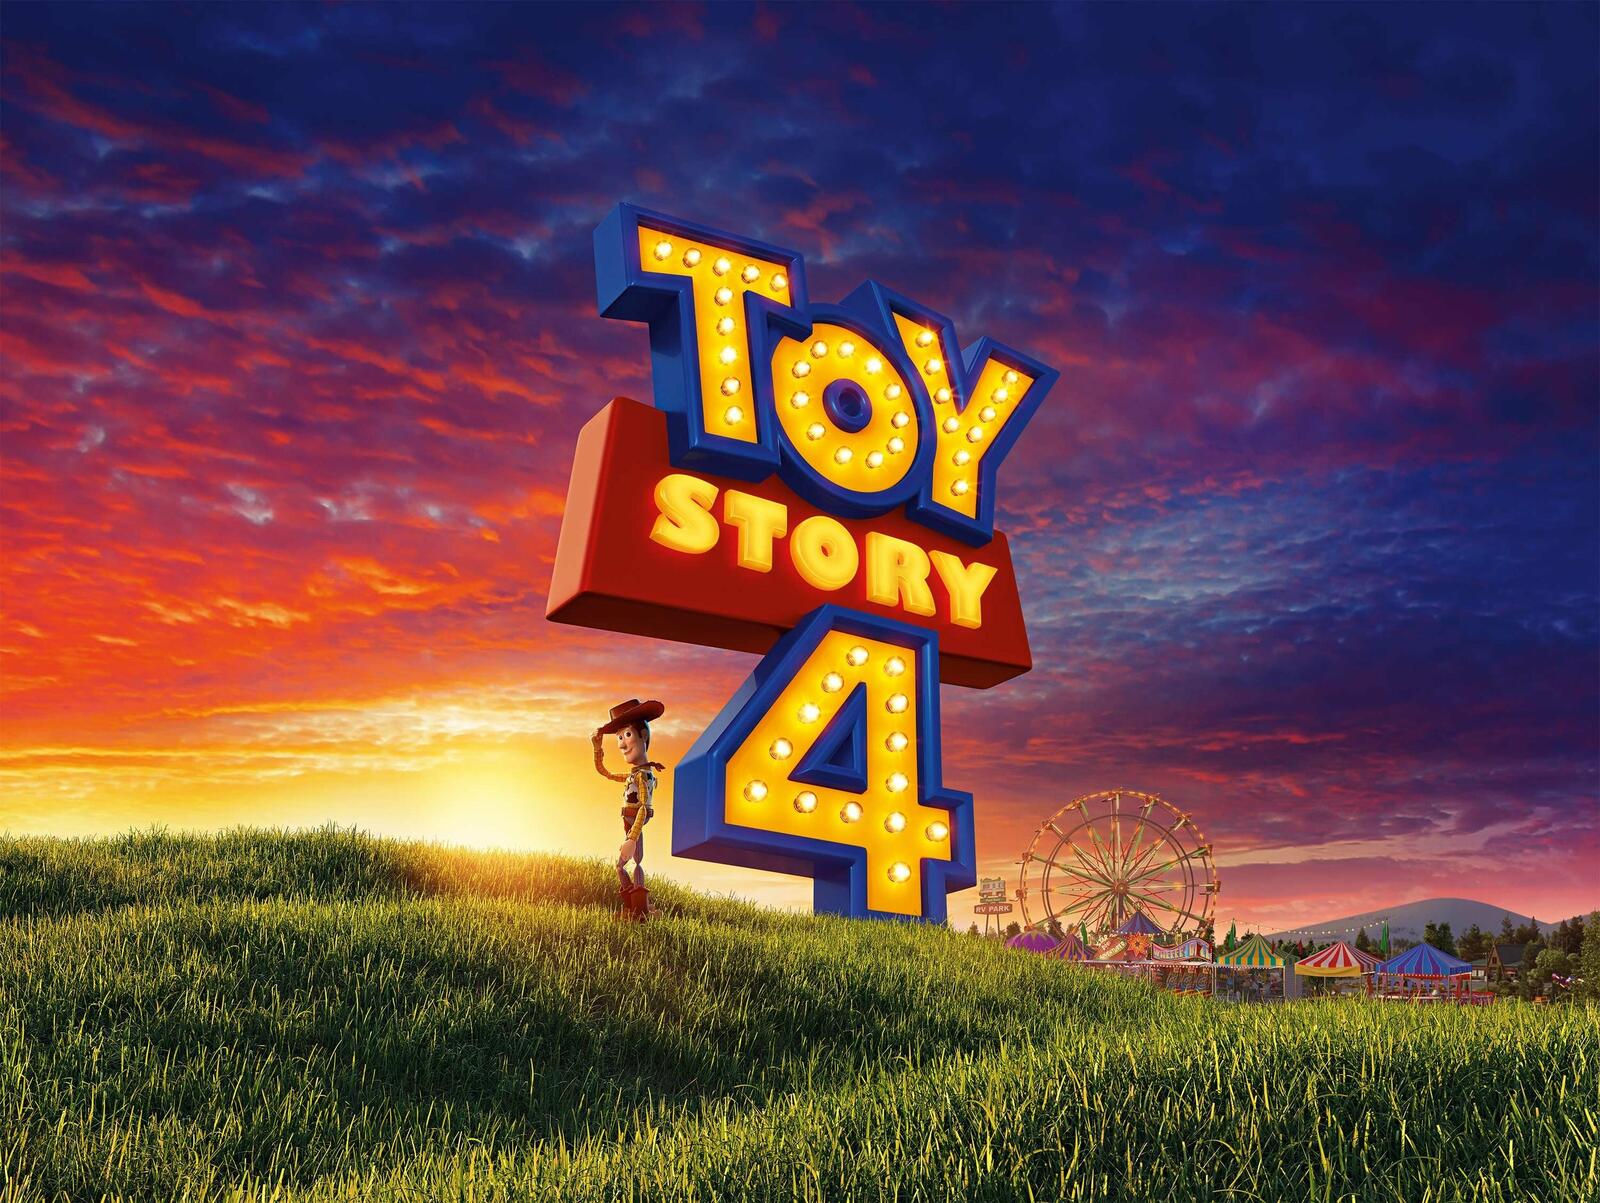 Wallpapers toy story 4 cinema 2019 movies on the desktop